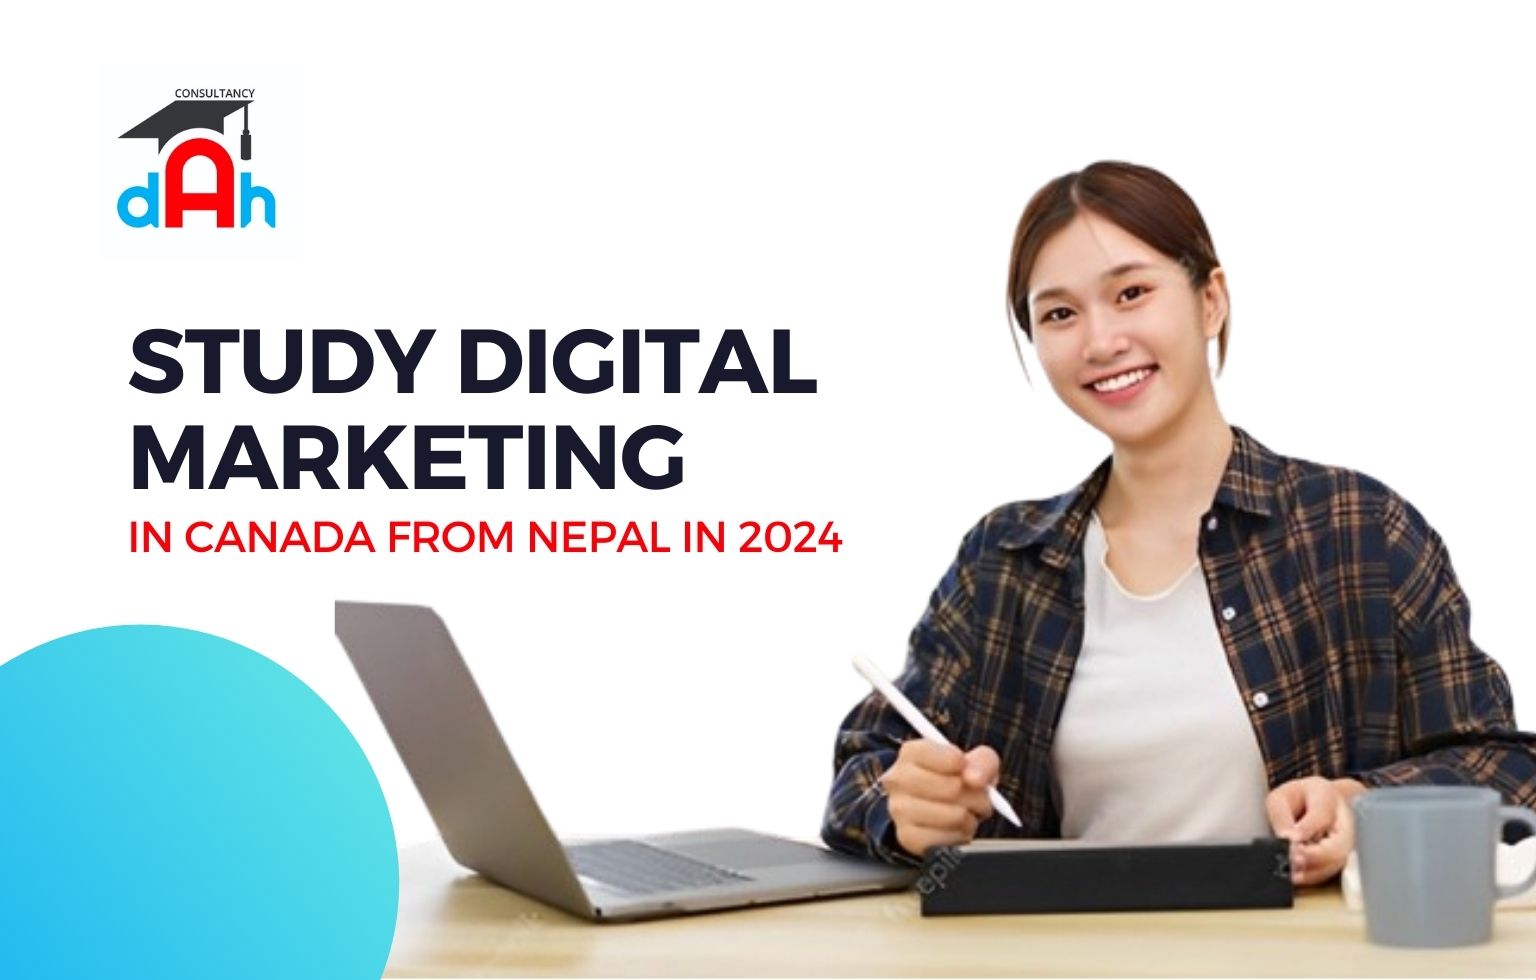 Study Digital Marketing in Canada from Nepal for 2024